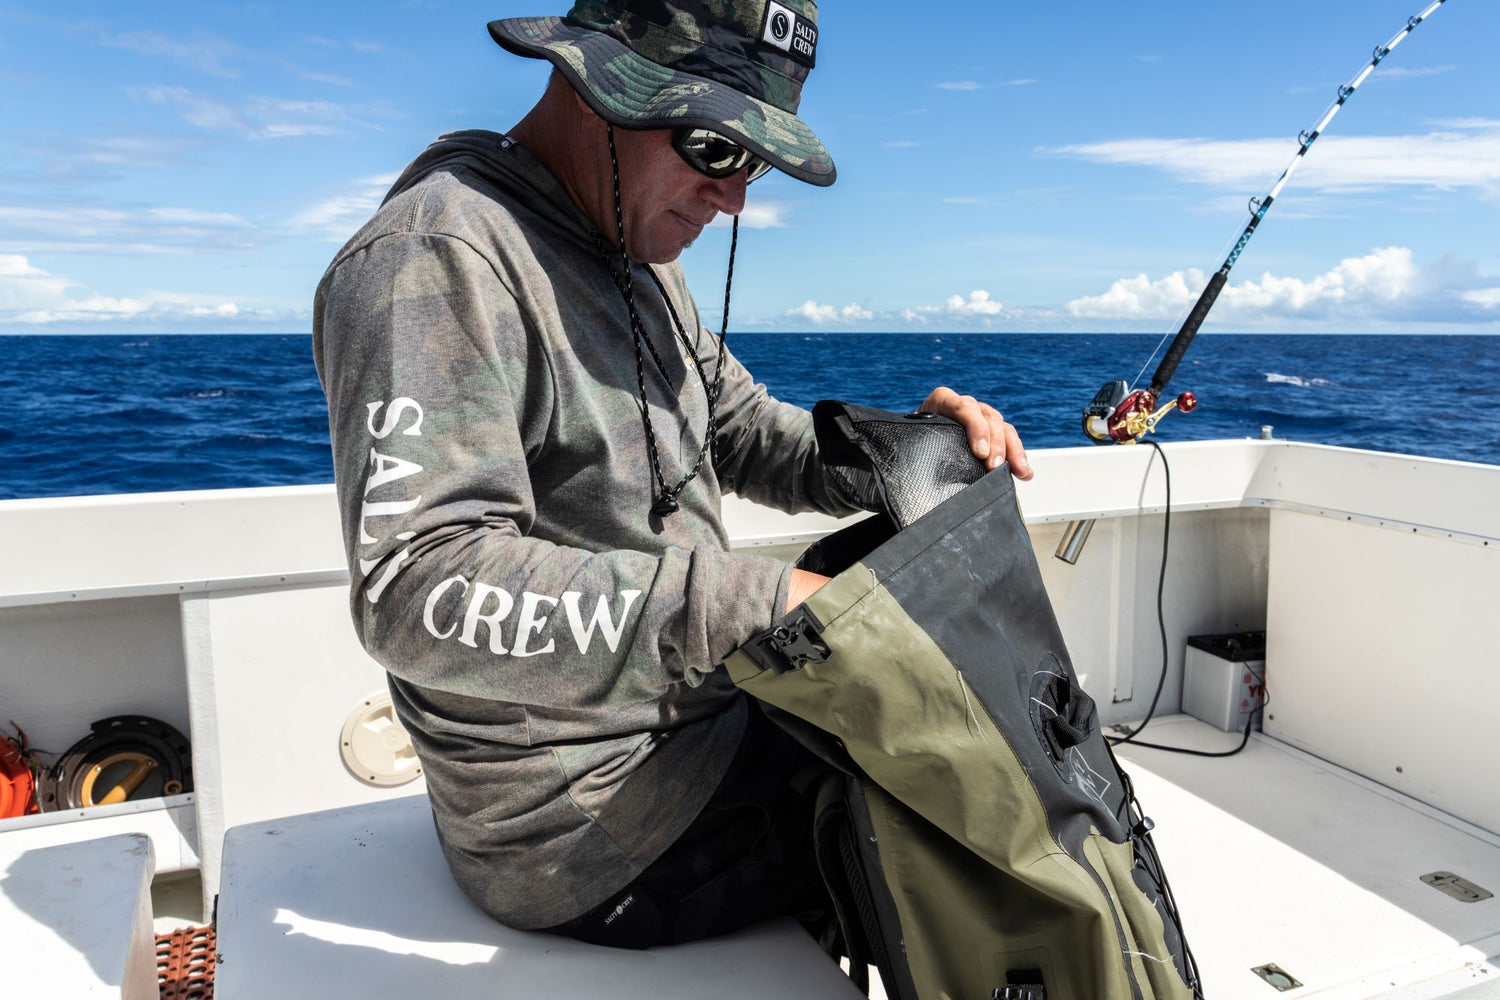 Fishing Gear & Clothing for Anglers, Carhartt